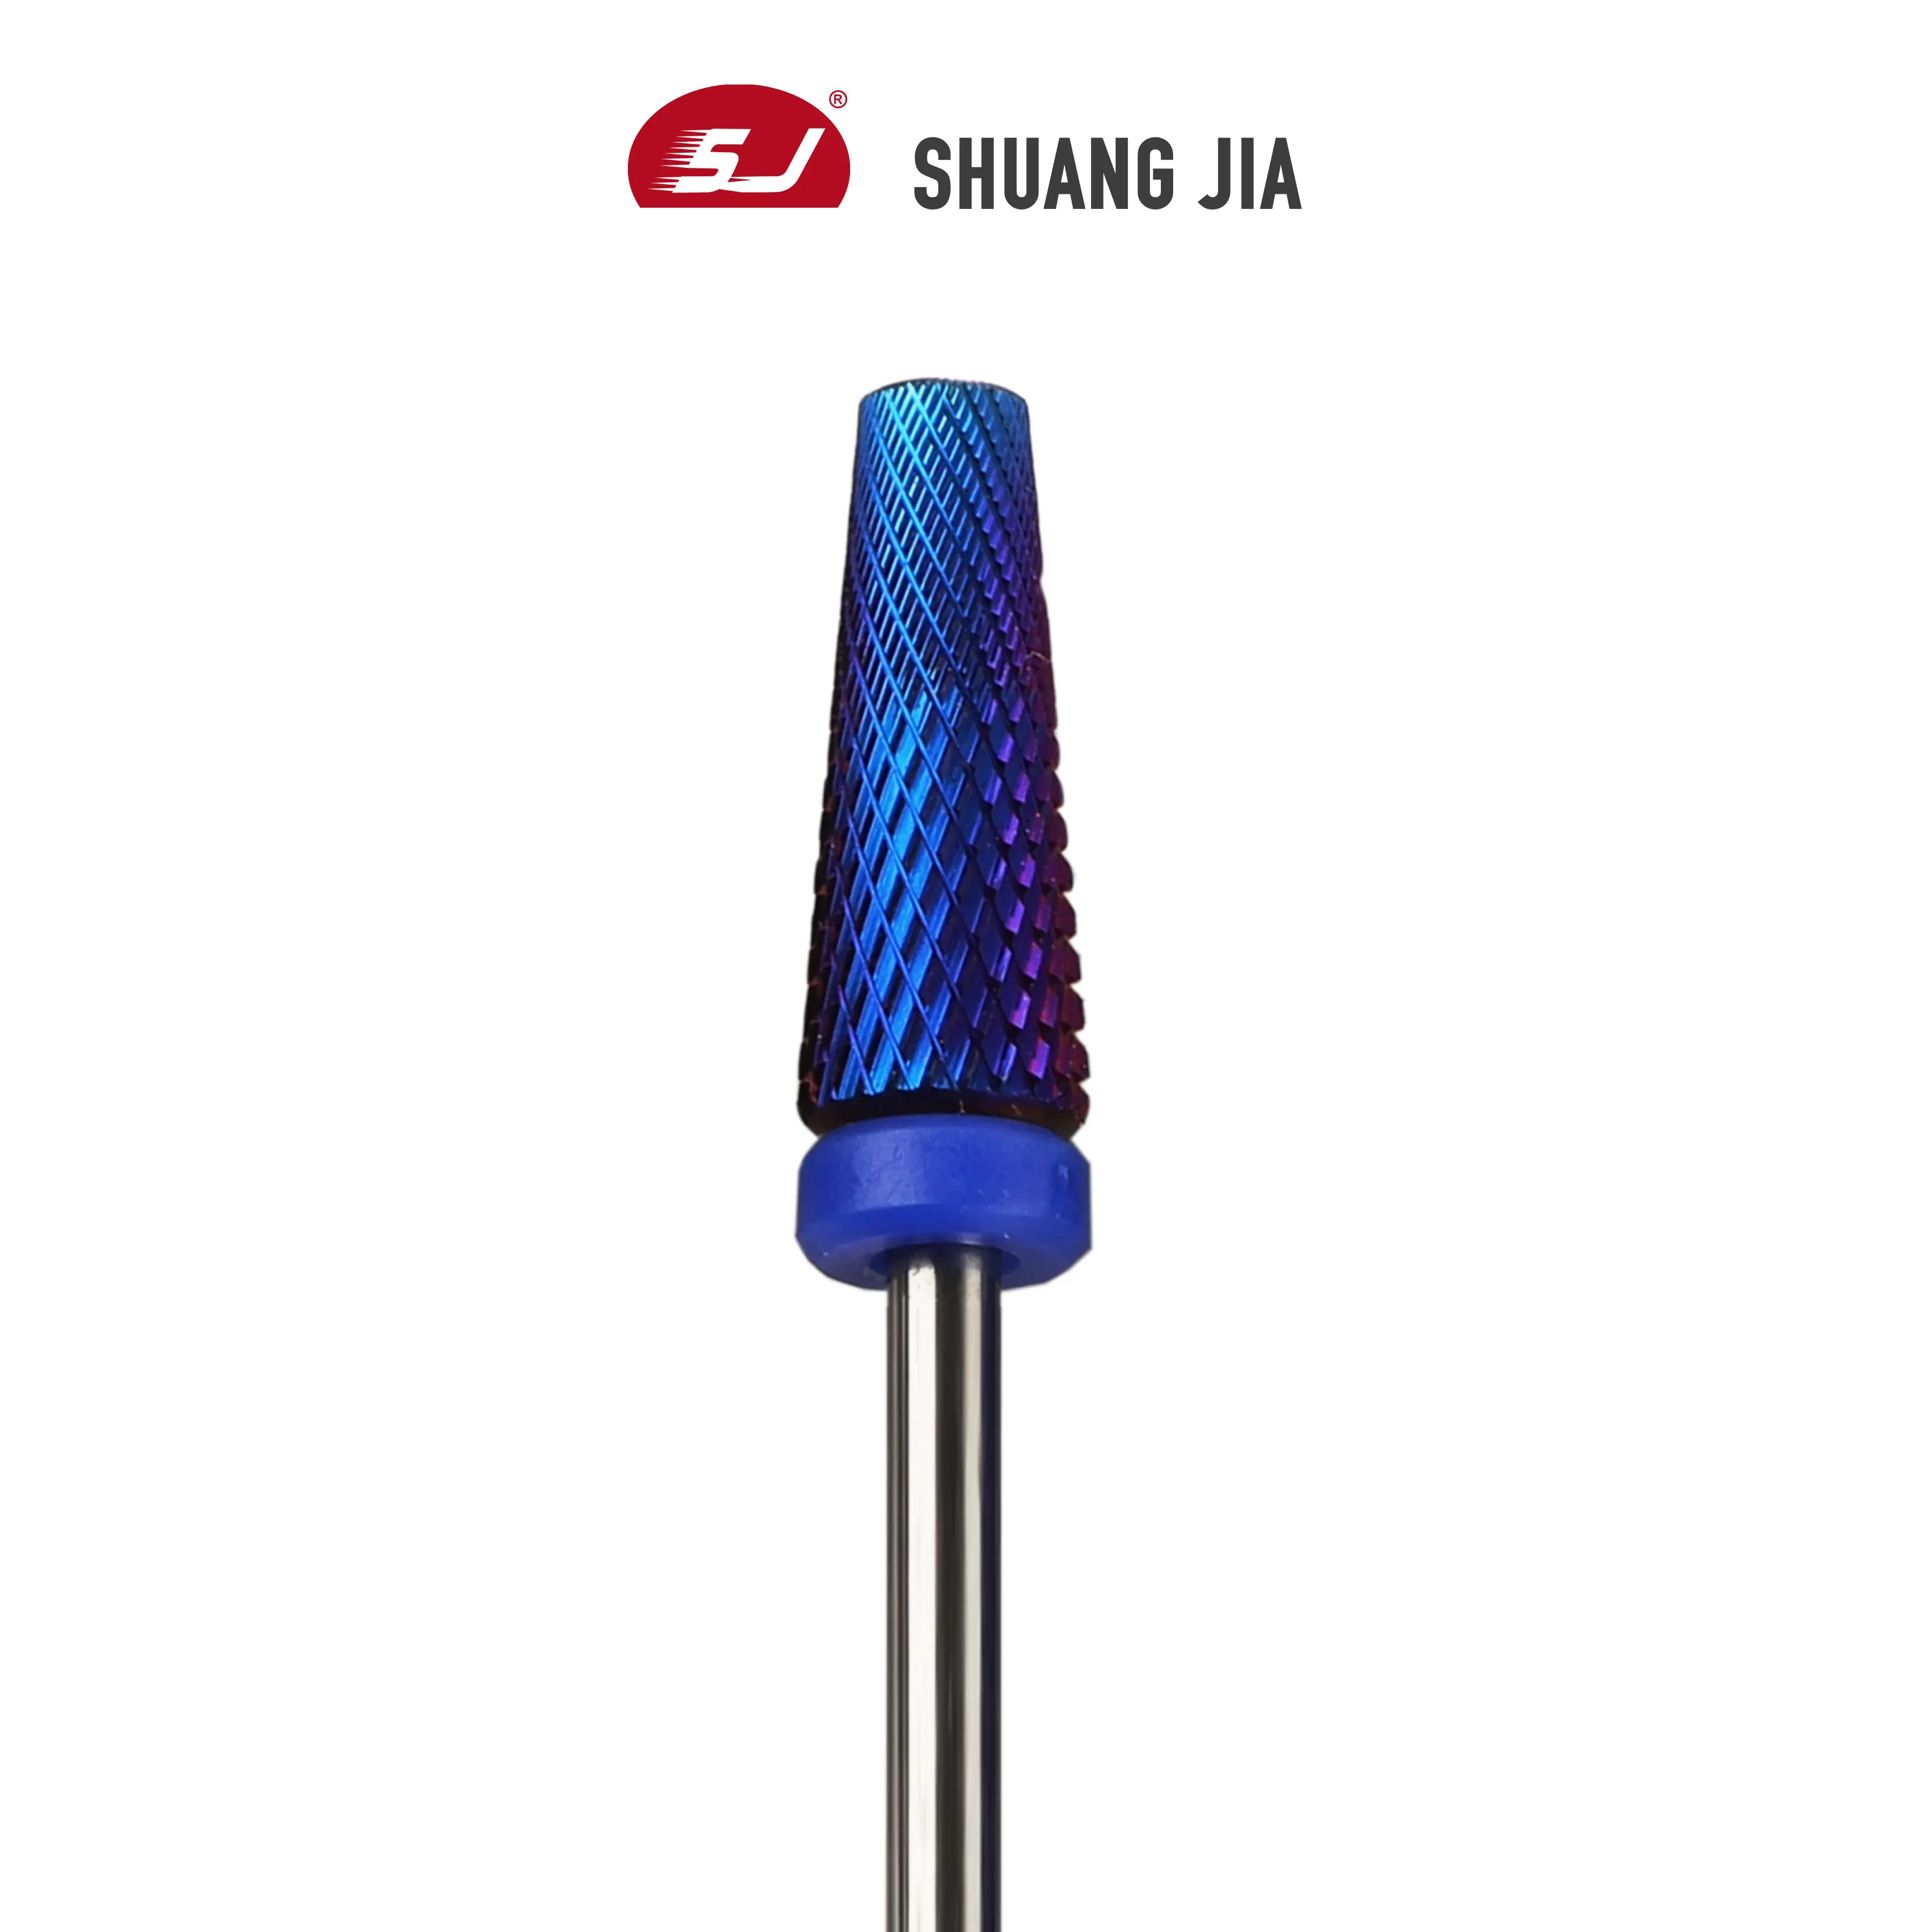 SHUANGJIA Professional Mixed Cuts Blue Nano Coating Safety Manicure Tungsten Carbide nail drill bits